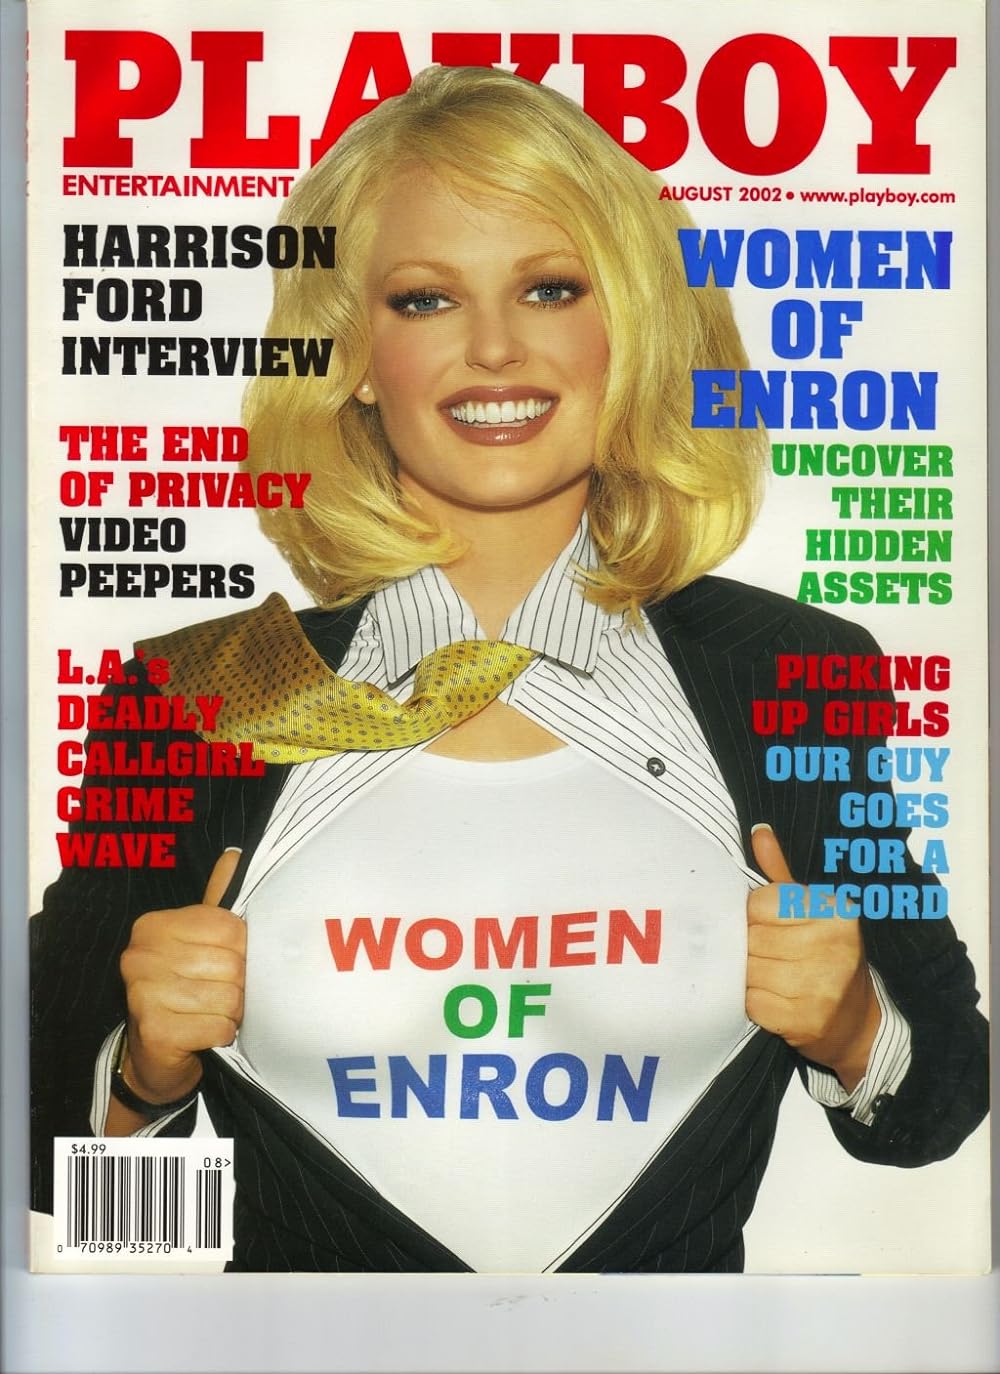 curtis dameron recommends Women Of Enron Video